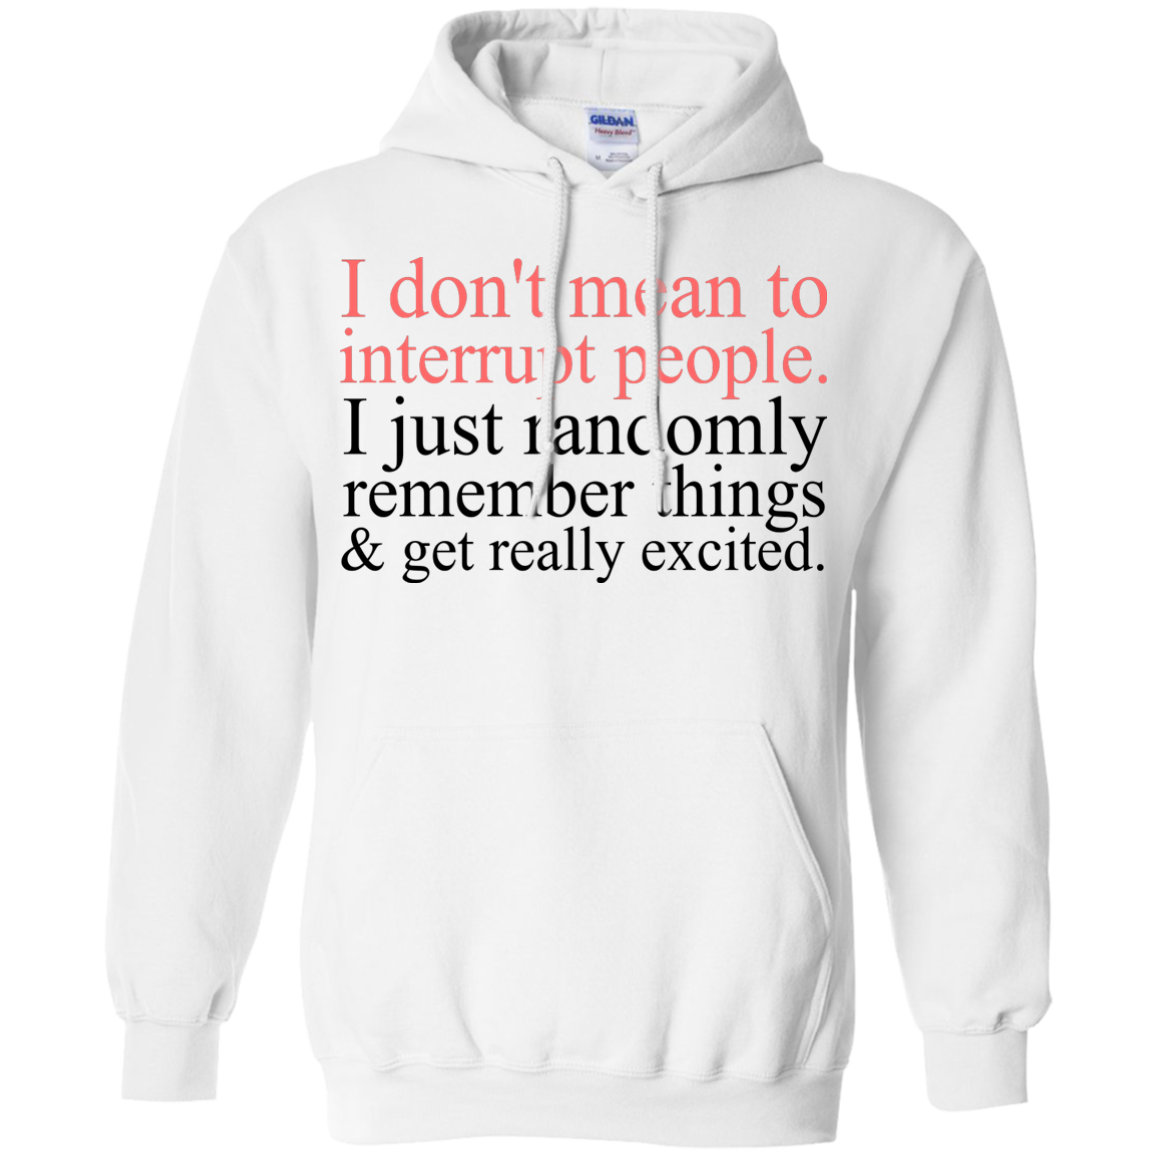 I don't mean to interrupt people shirt, sweater, tank